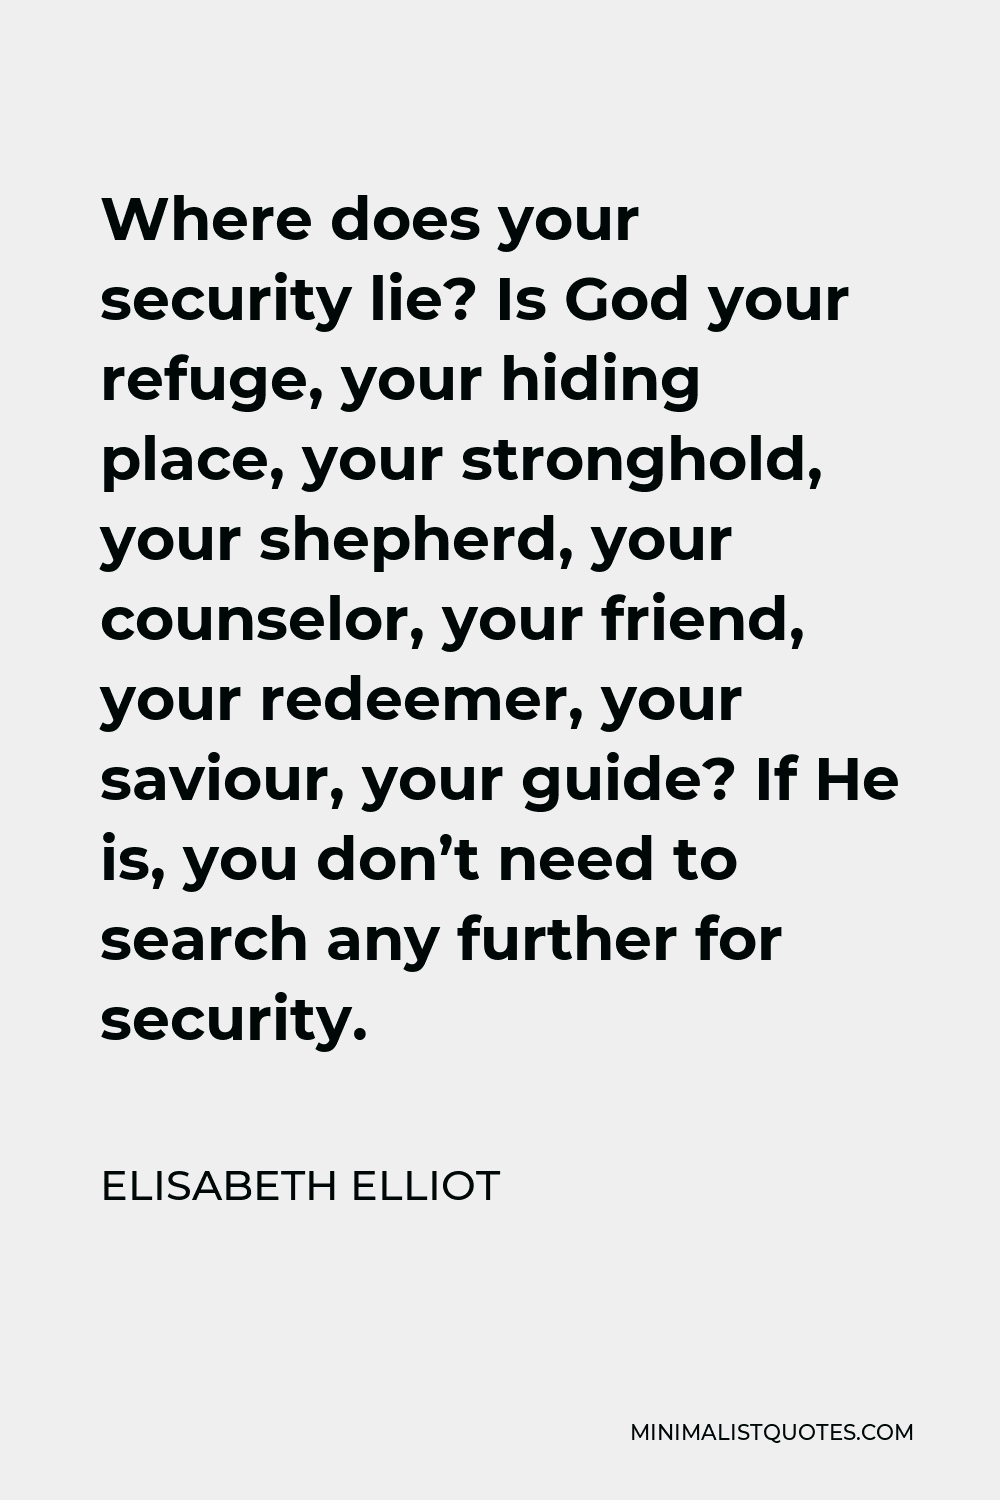 Elisabeth Elliot Quote - Where does your security lie? Is God your refuge, your hiding place, your stronghold, your shepherd, your counselor, your friend, your redeemer, your saviour, your guide? If He is, you don’t need to search any further for security.